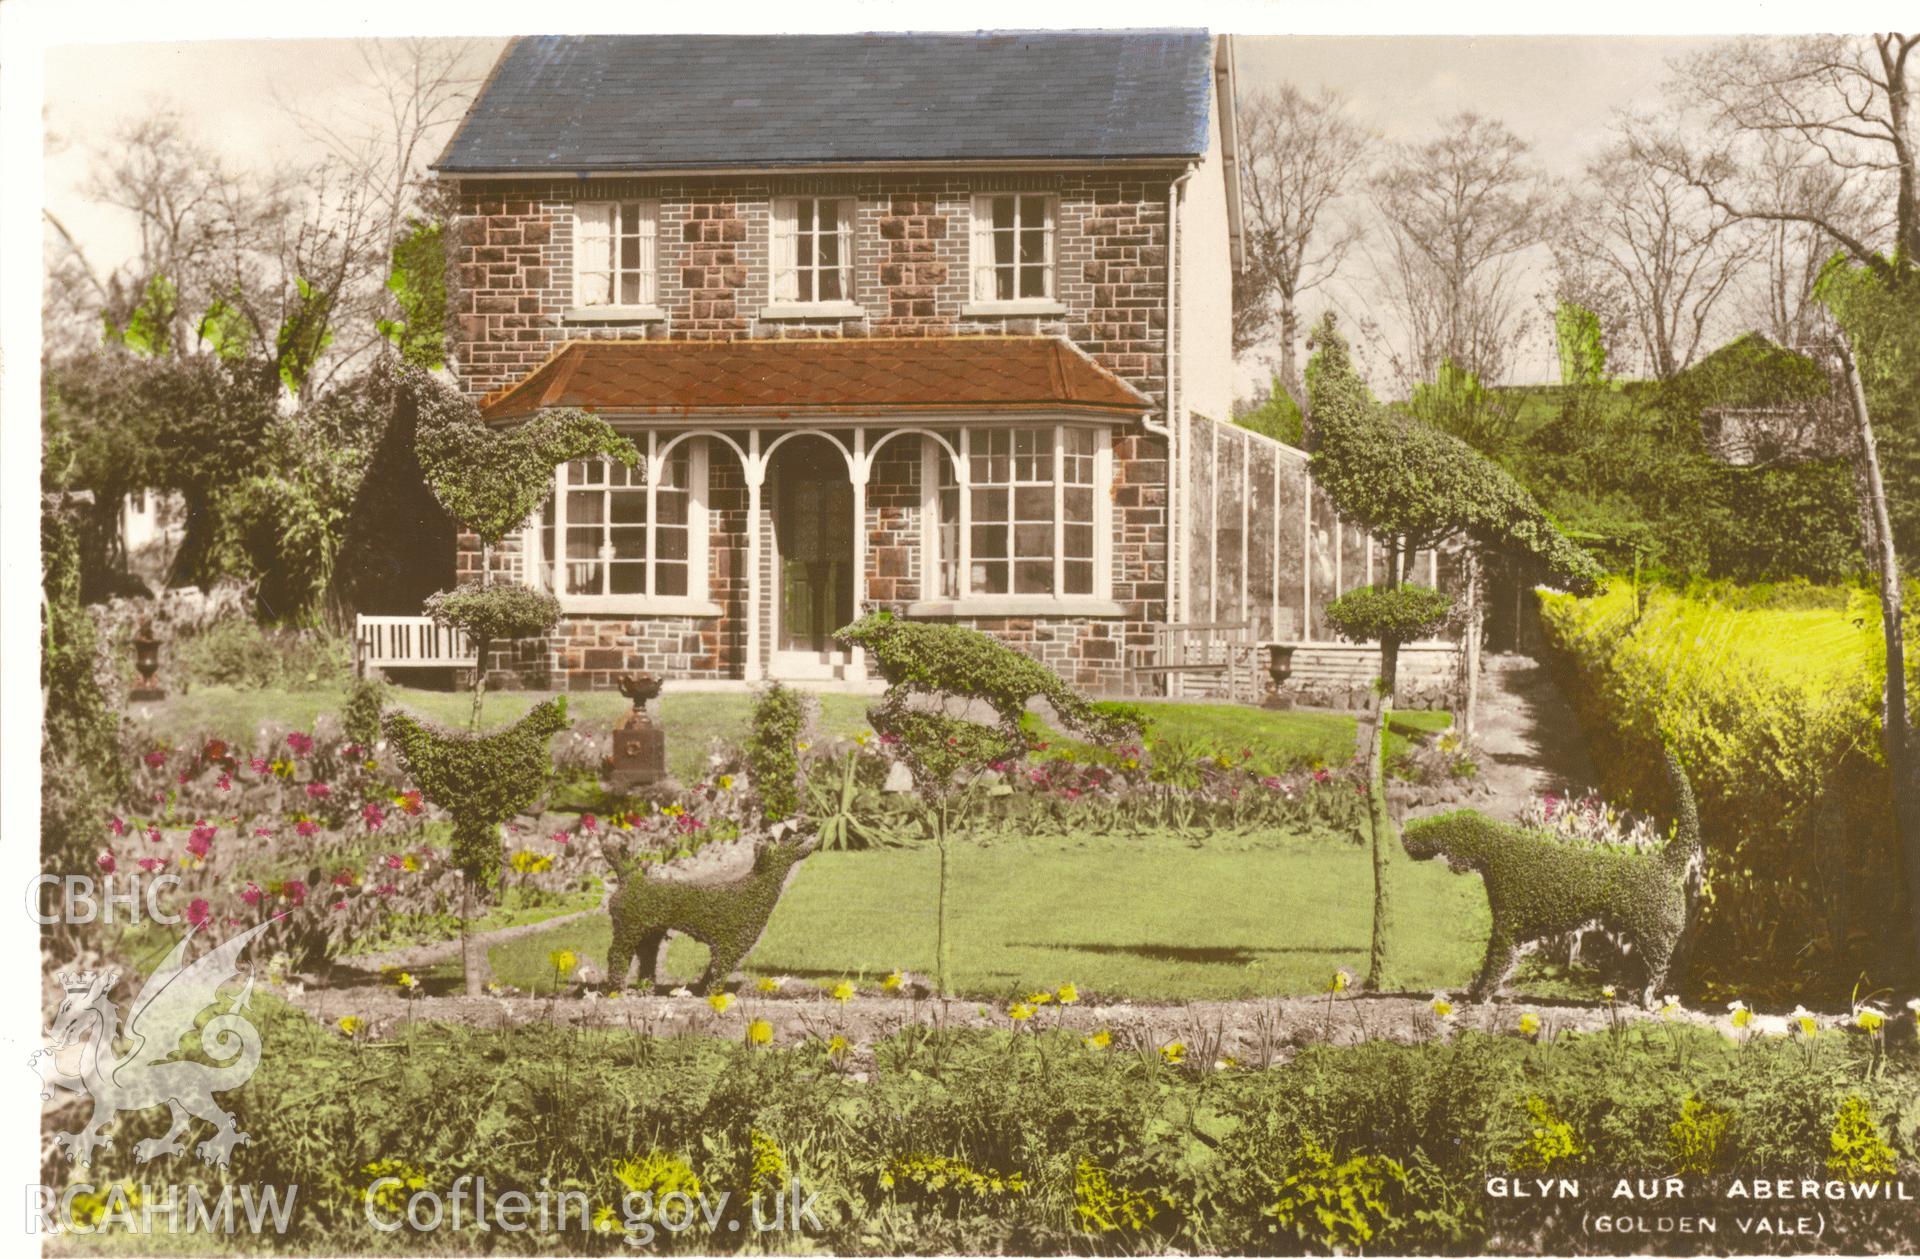 Digitised postcard image of topiary at Glynaur, Abergwili, D. Davies, Glynaur, Abergwili. Produced by Parks and Gardens Data Services, from an original item in the Peter Davis Collection at Parks and Gardens UK. We hold only web-resolution images of this collection, suitable for viewing on screen and for research purposes only. We do not hold the original images, or publication quality scans.